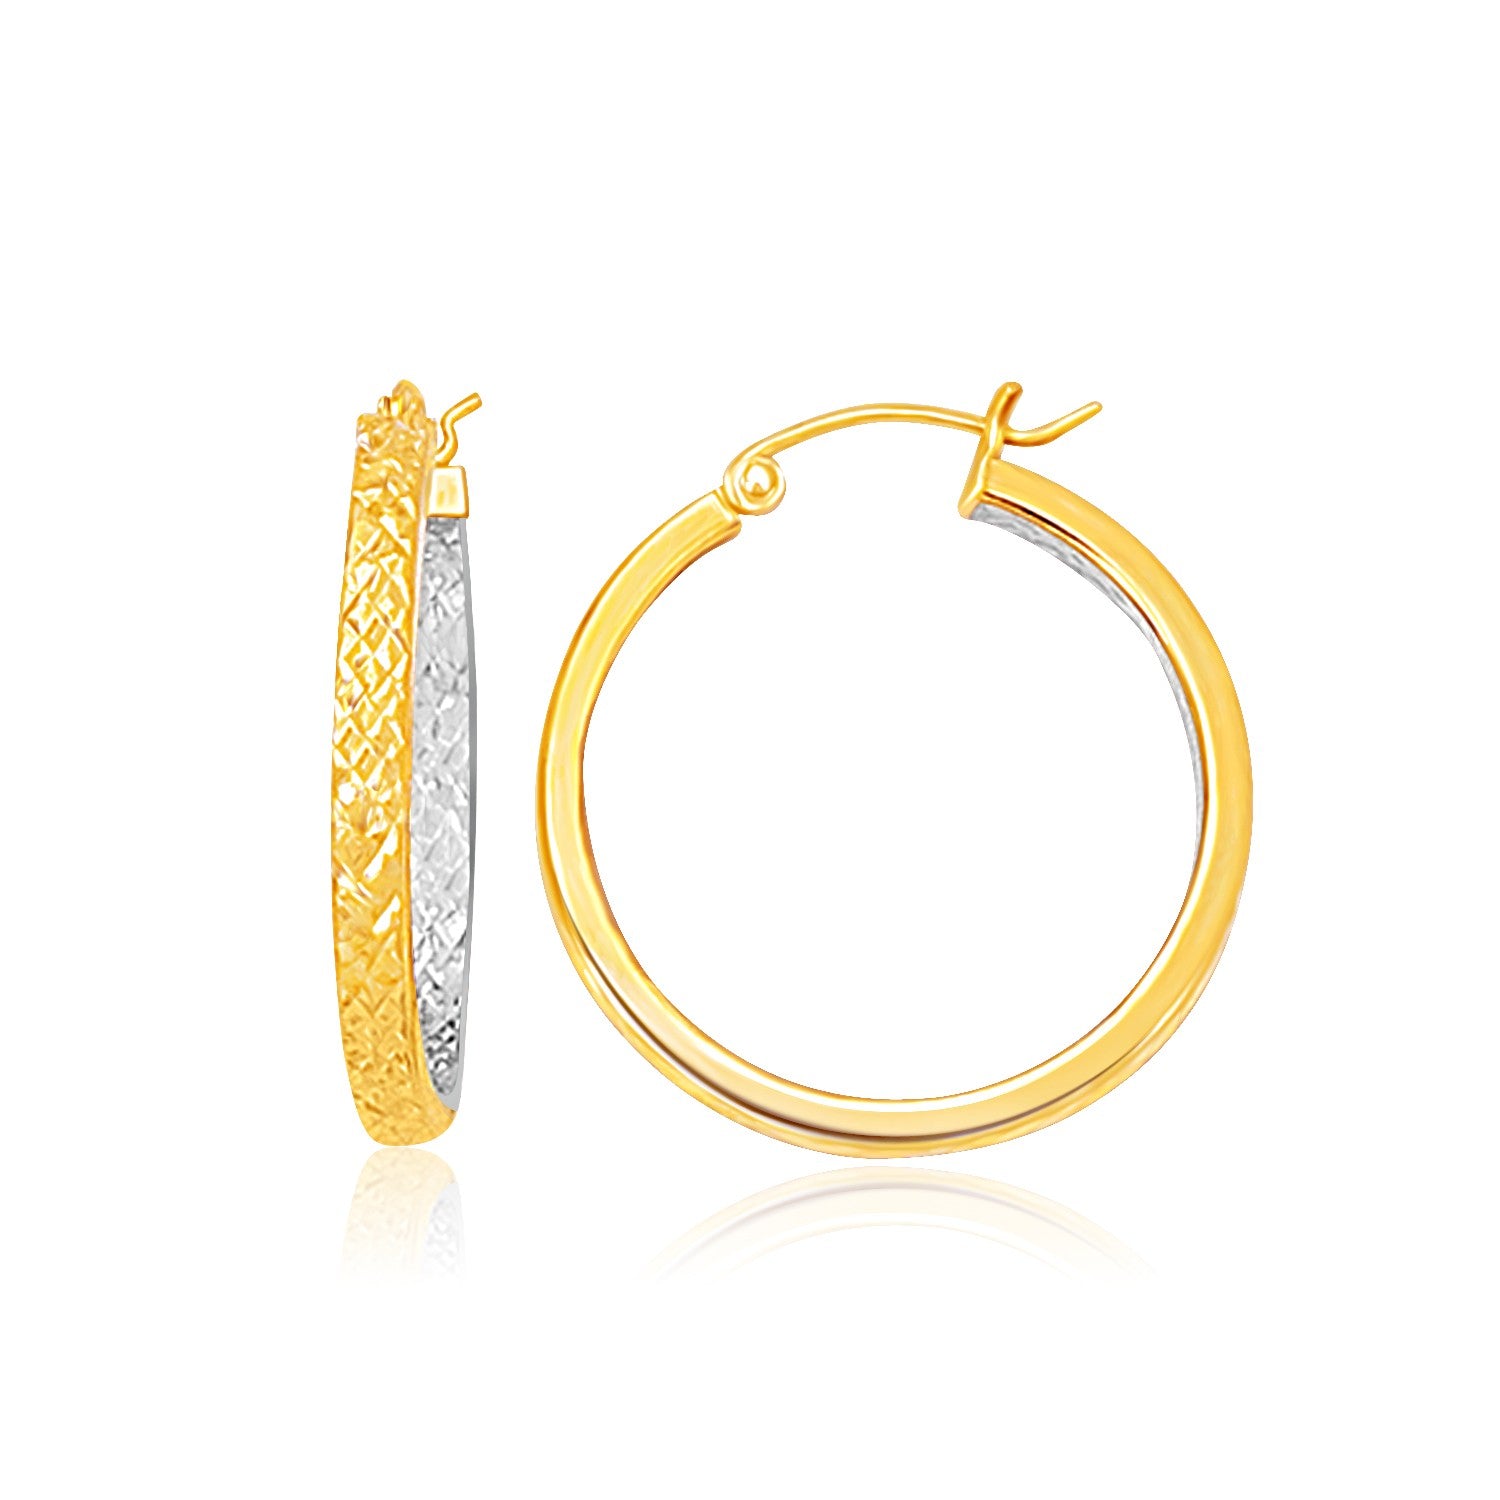 Two-Tone Yellow and White Gold Medium Patterned Hoop Earrings